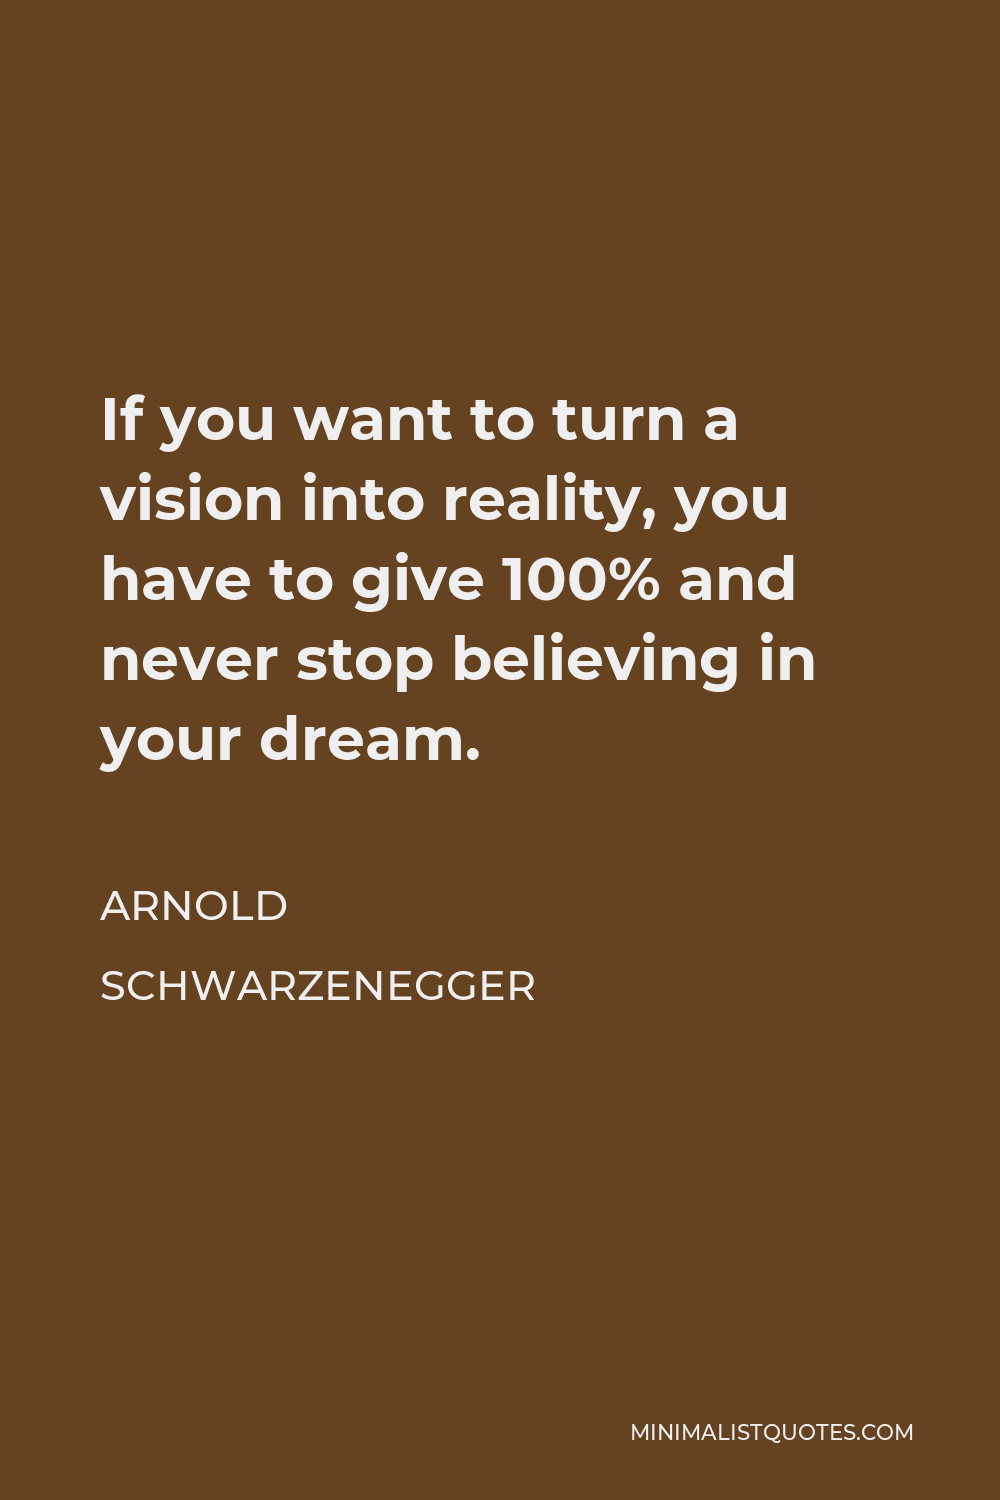 Arnold Schwarzenegger Quote - If you want to turn a vision into reality, you have to give 100% and never stop believing in your dream.